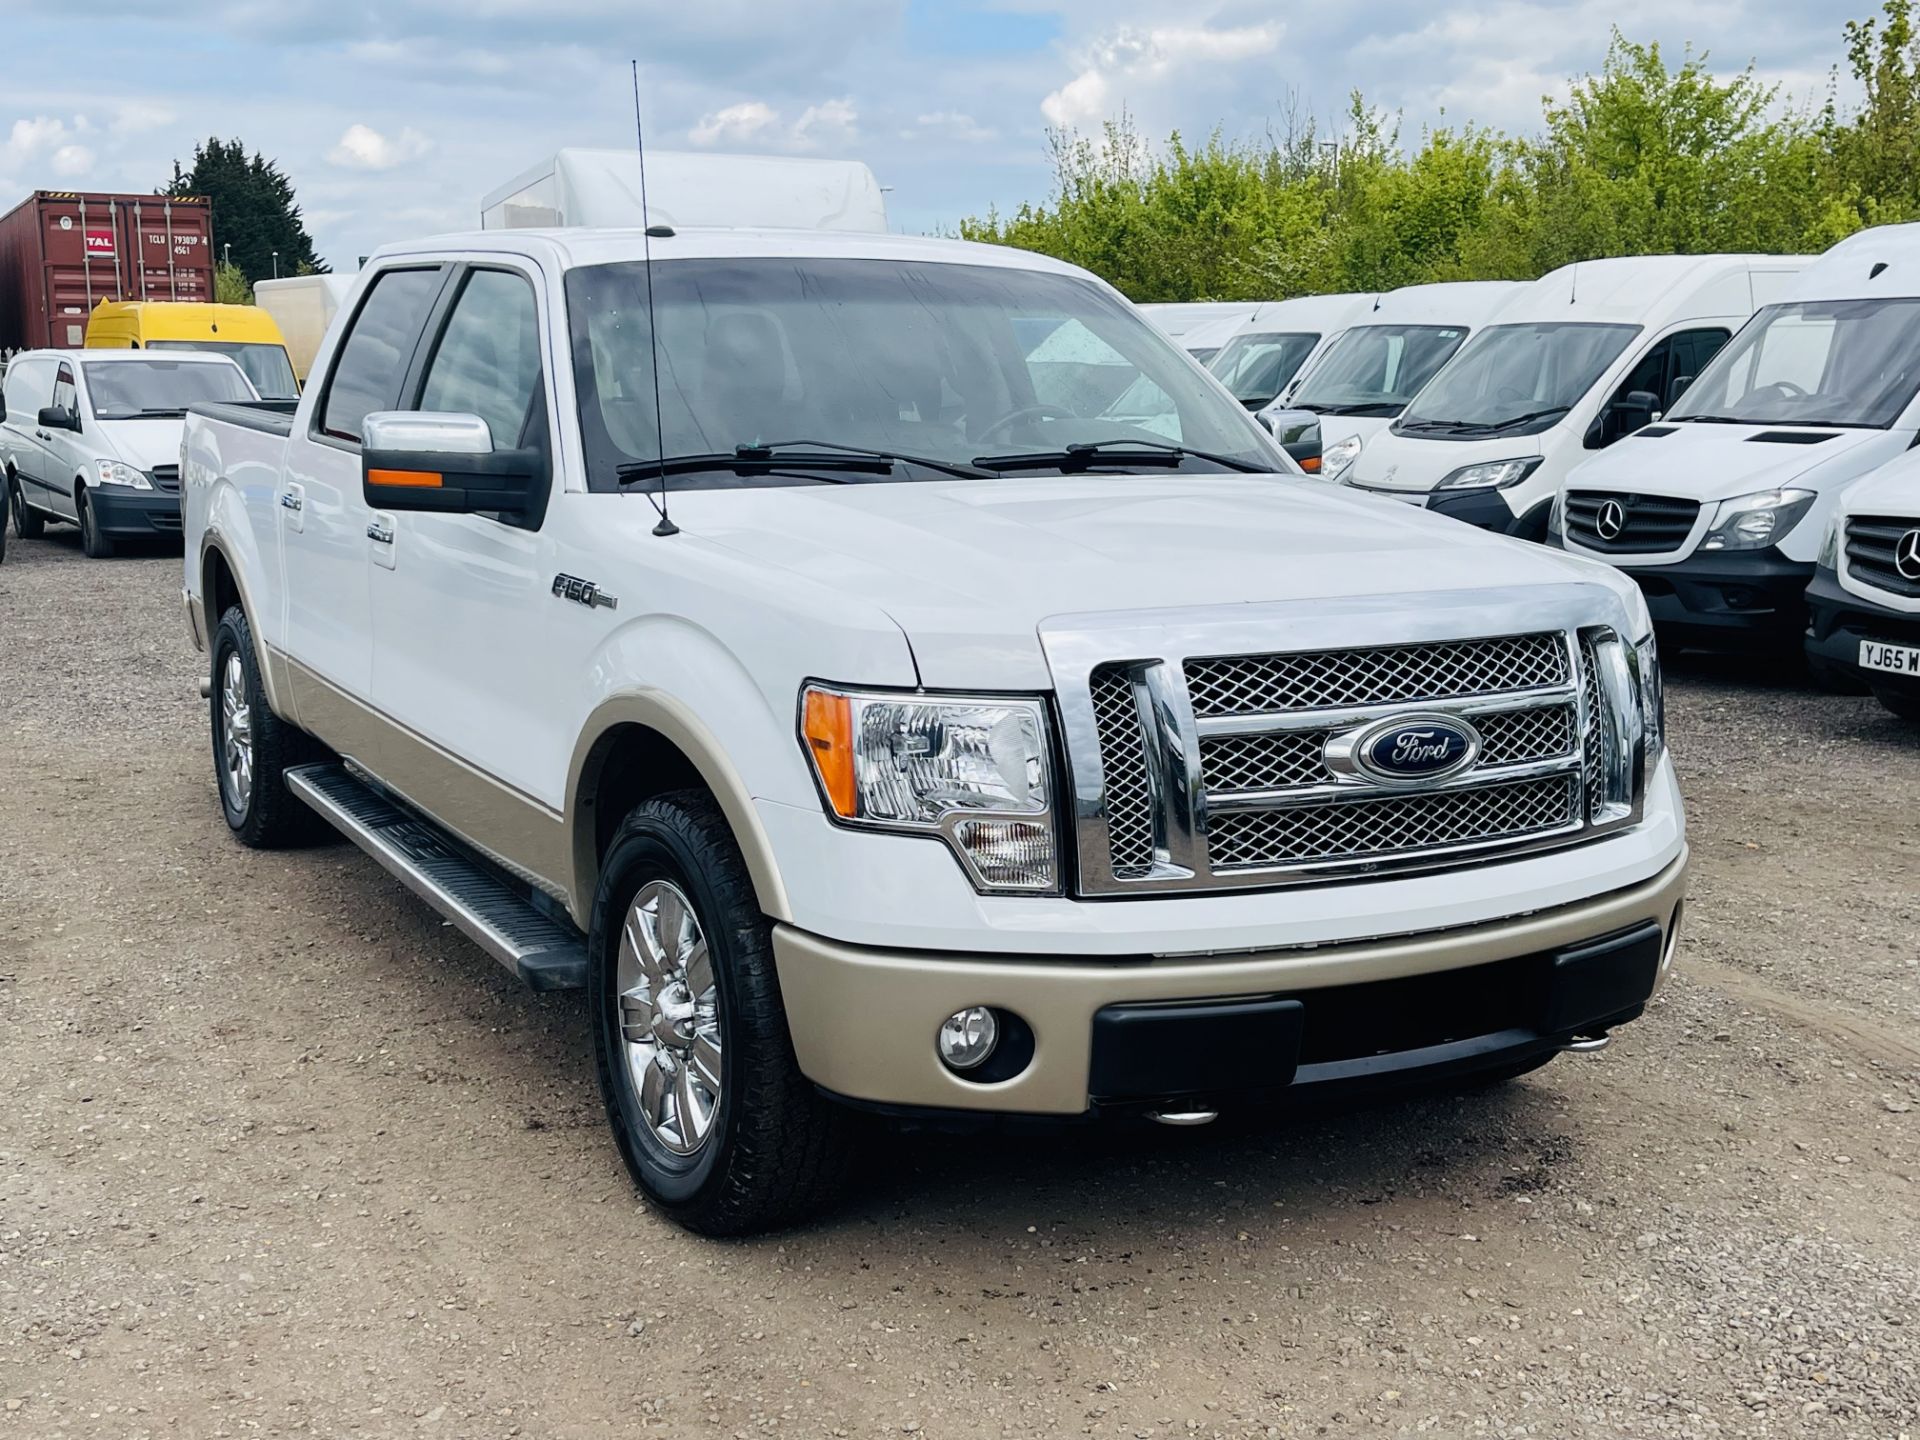 ** ON SALE ** Ford F-150 5.4L V8 Lariat Supercrew 4WD ' 2010 Year' A/C - Full Spec - ULEZ Compliant - Image 2 of 29